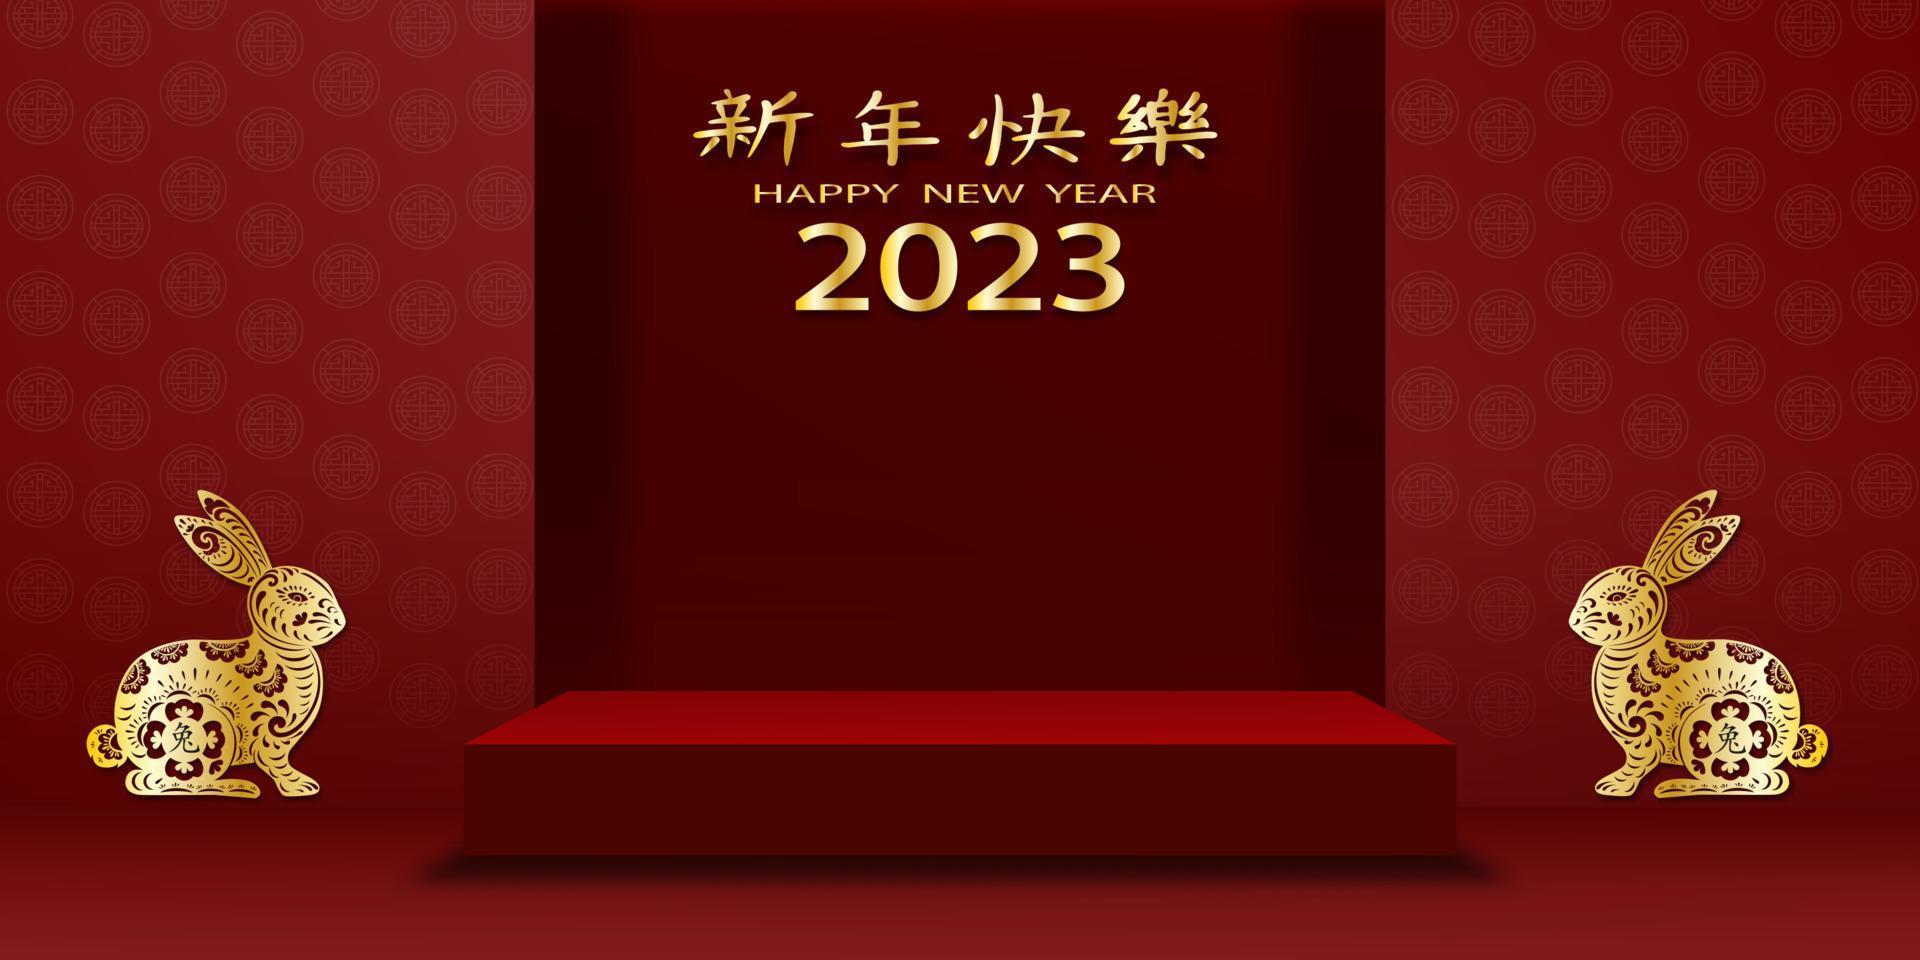 Happy Chinese New Year 2023,Year of the Rabbit Zodiac,Studio room 3D Podium with Golden Rabbit paper cut with flower on red wall background,Translation, Happy new year vector